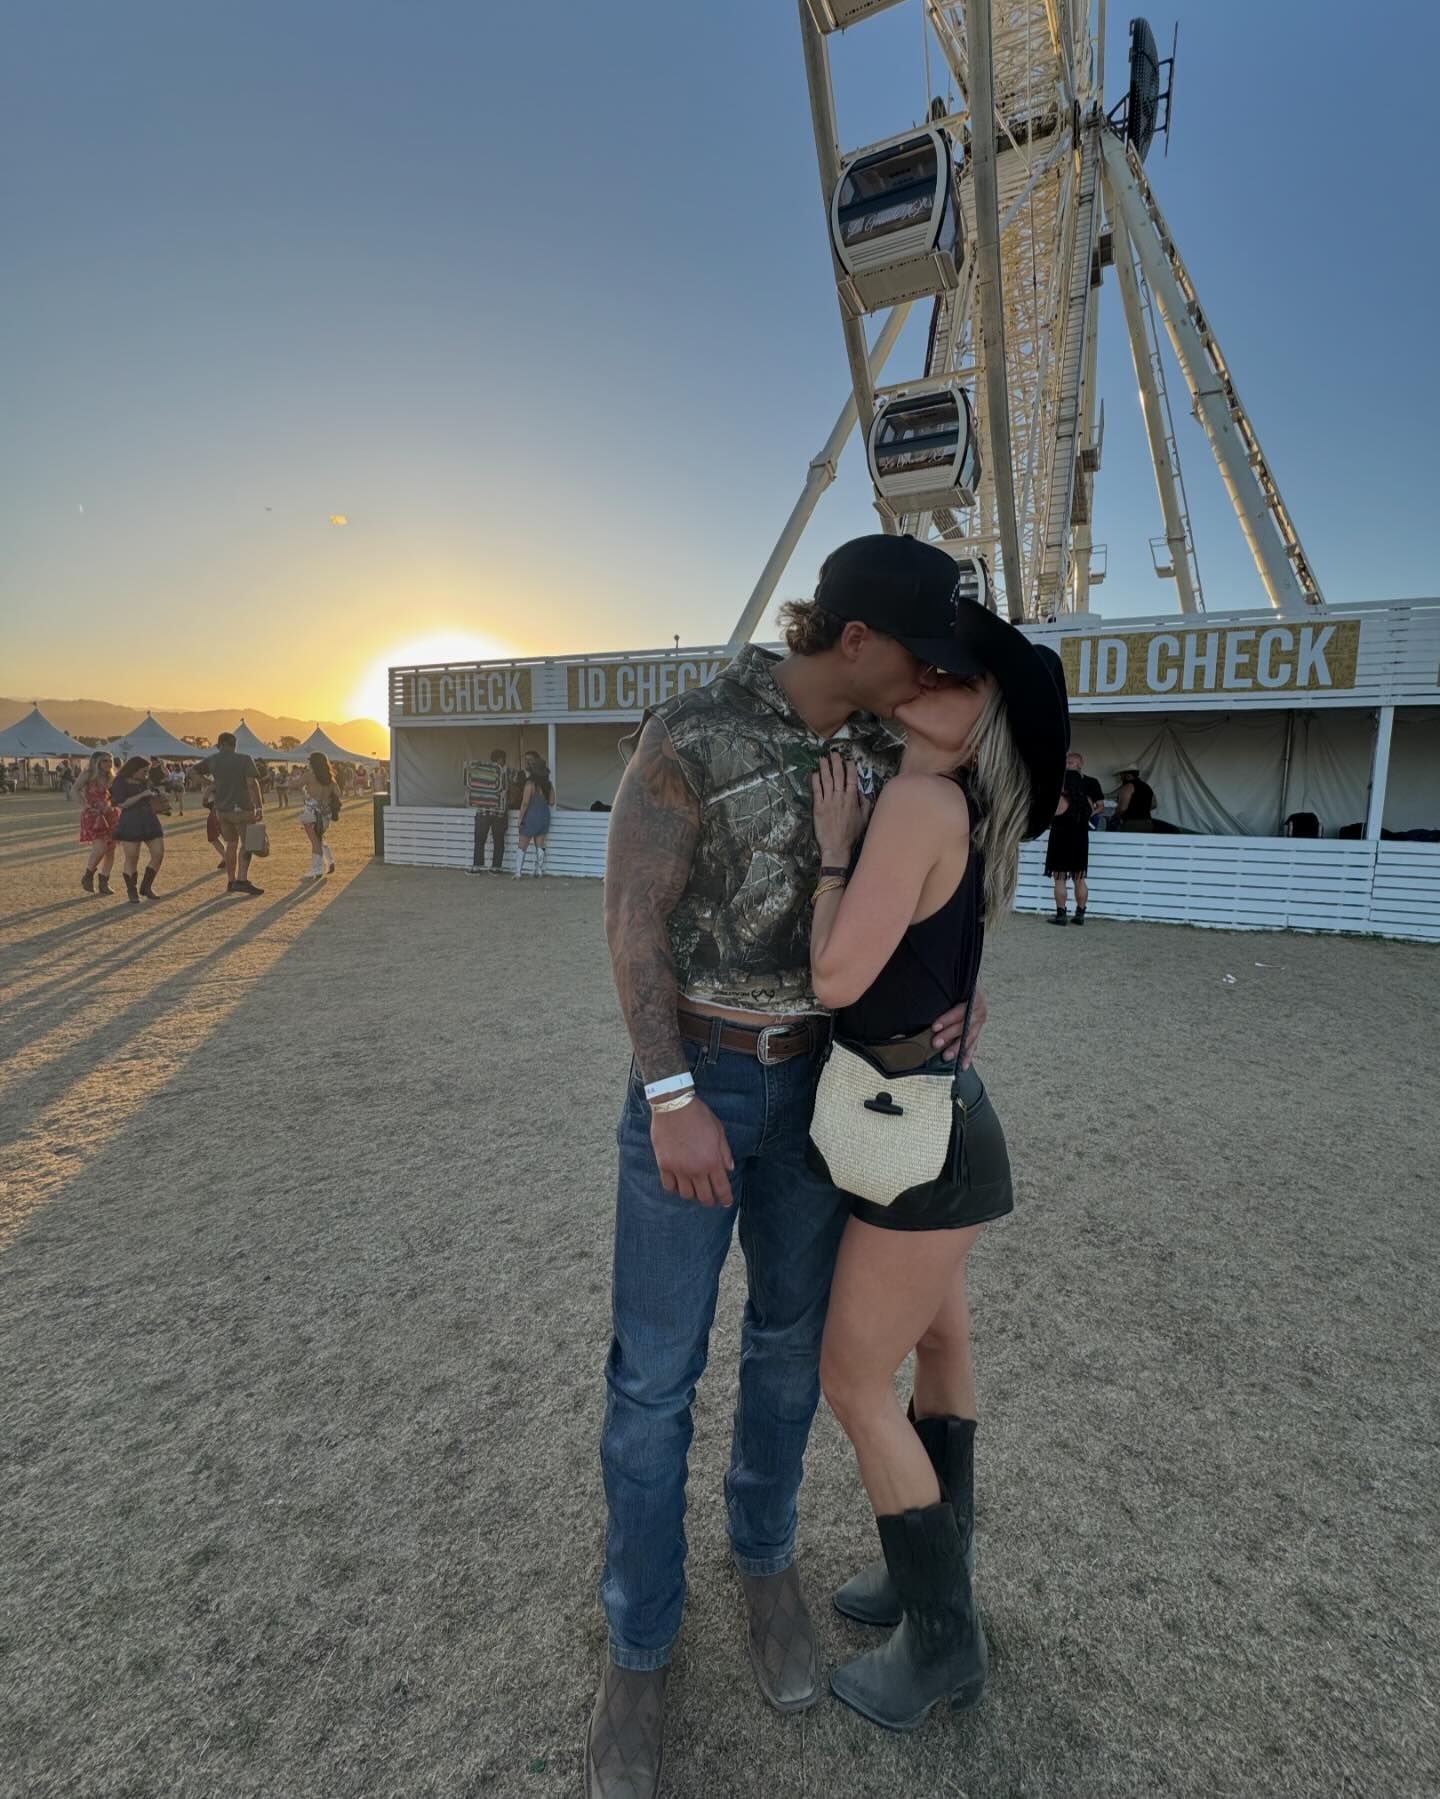 The couple was seen wearing matching cowboy hats and boots as they attended the country music festival together